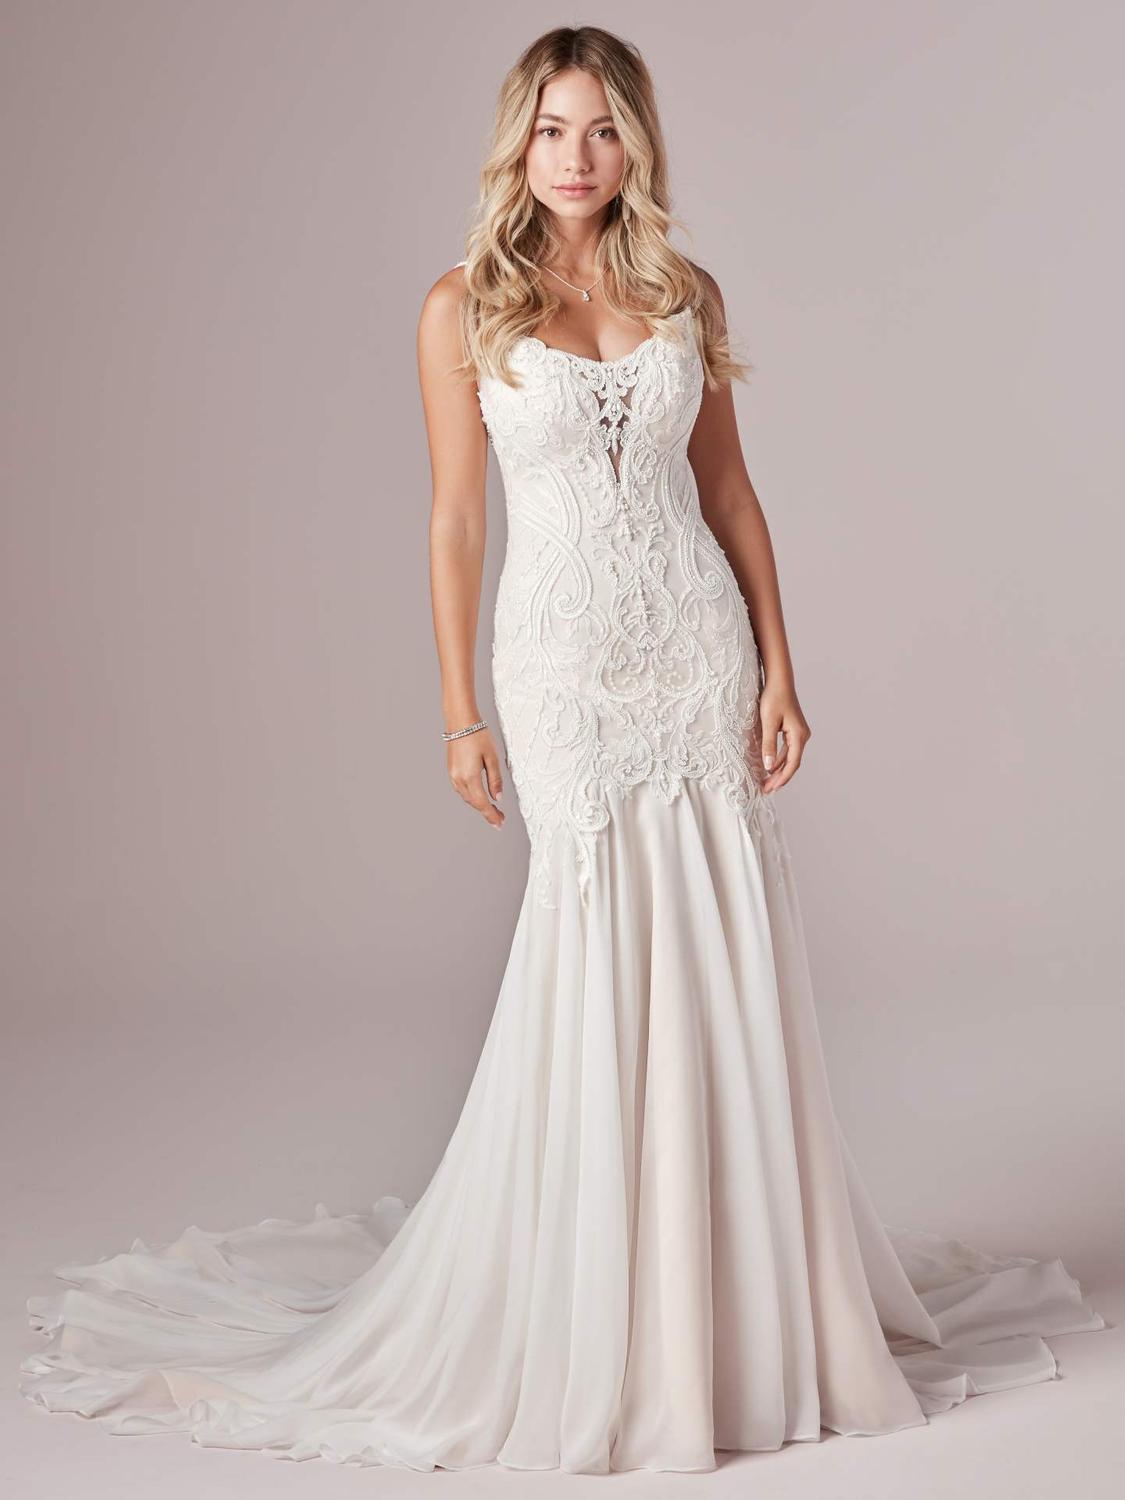 Wedding Dress Trends For The 2020 Bride. maggie sottero near me. 